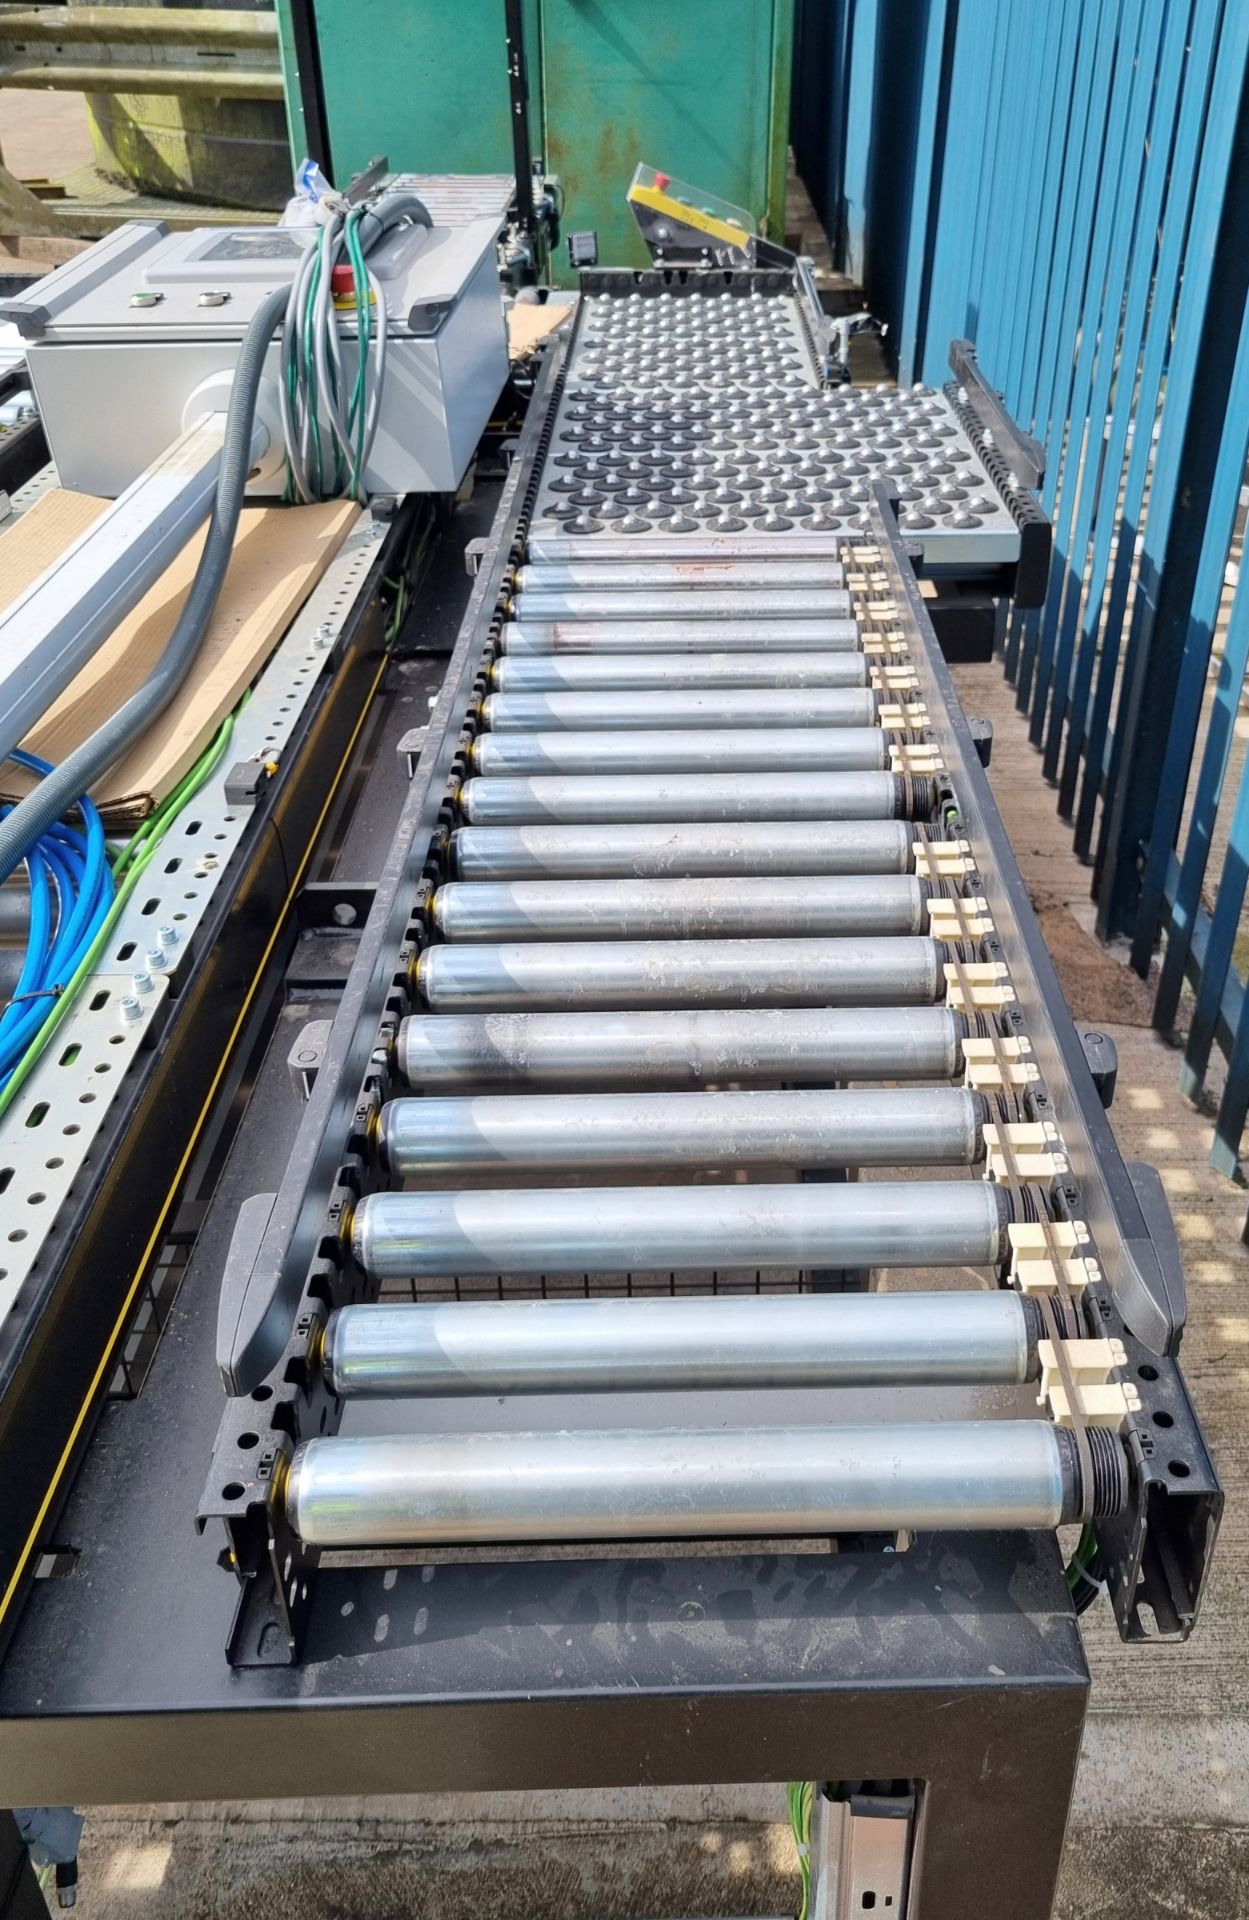 Interroll powered triple roller conveyor system with RM 8731 transfer plates and control panel - Image 11 of 14